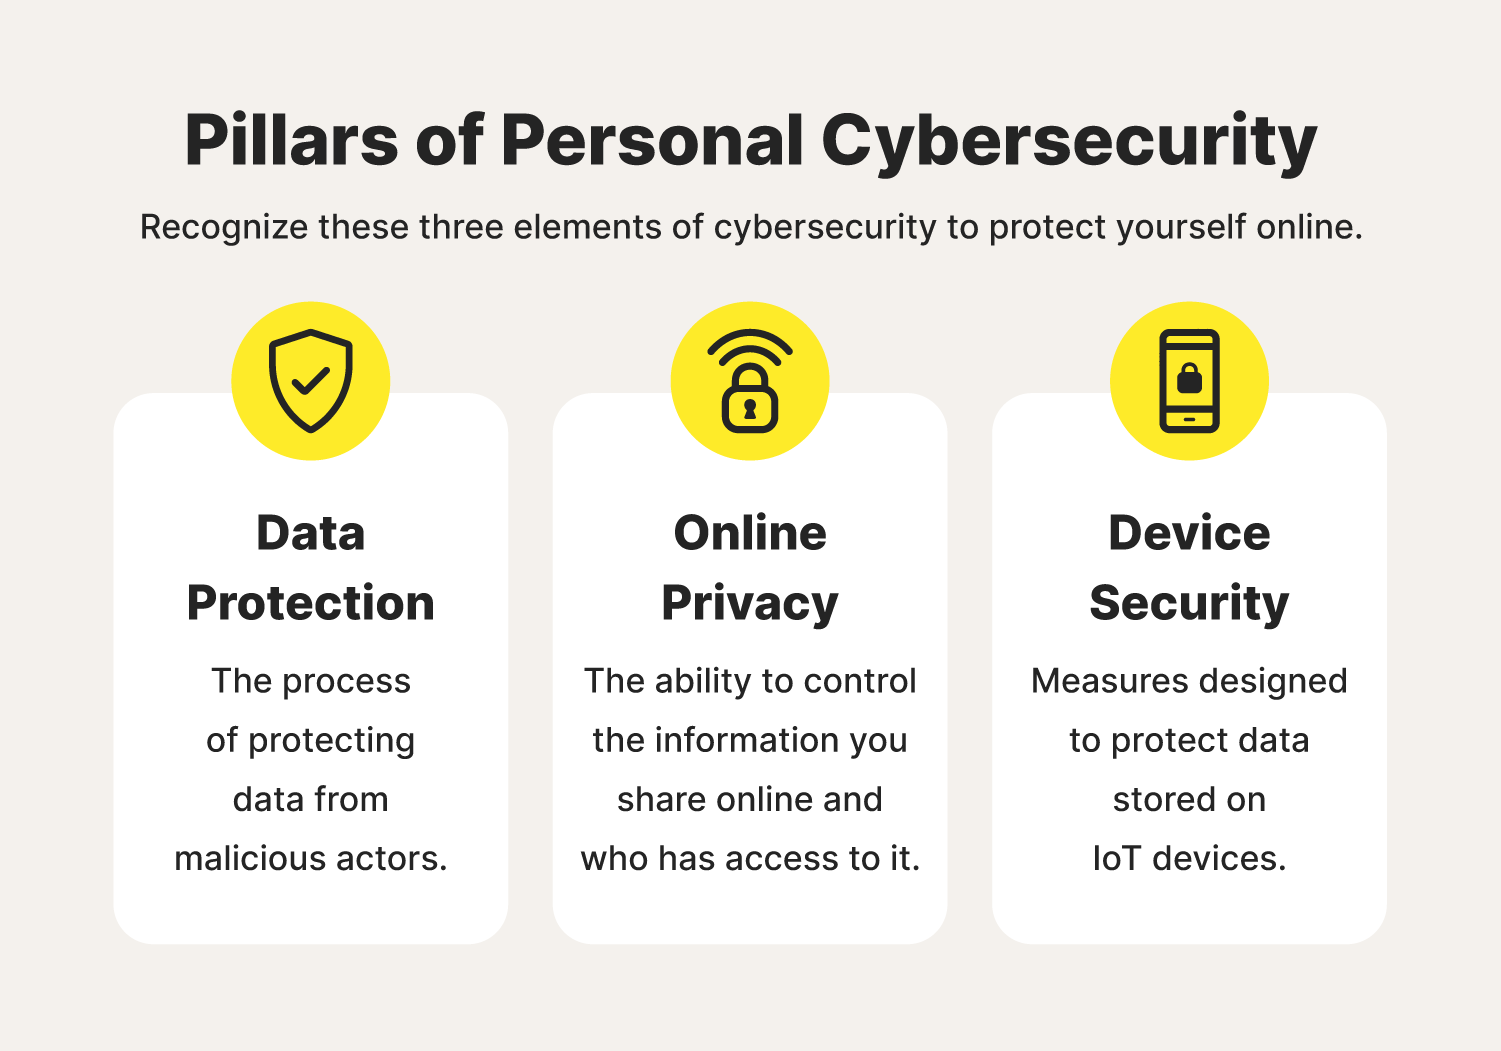 Three illustrations accompany the pillars of personal cybersecurity, including data protection, online privacy, and device security. 